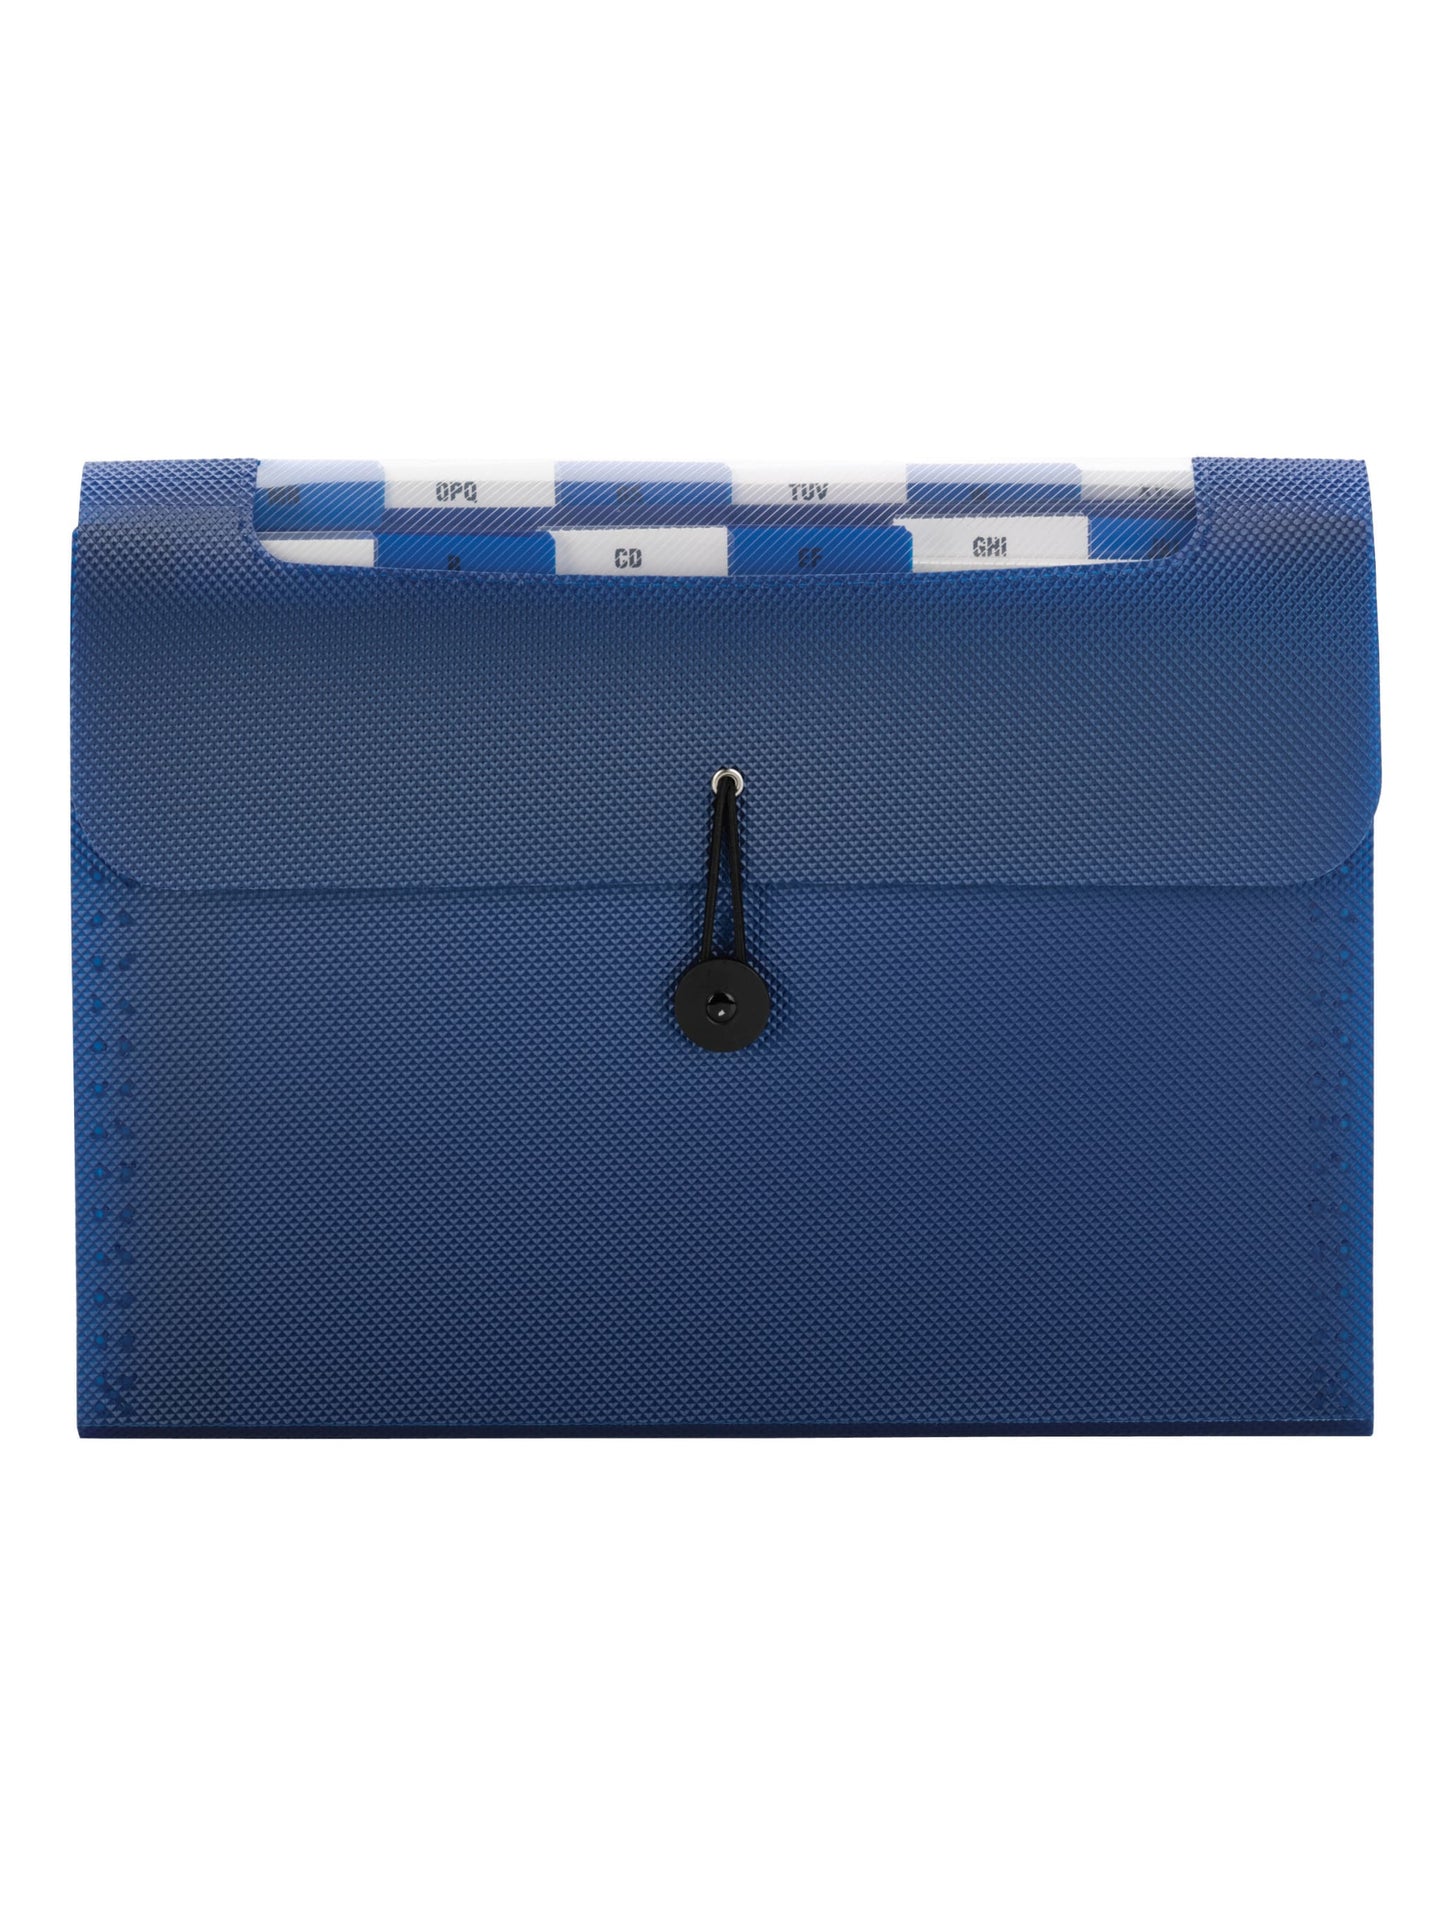 Poly Step Index Organizers, 12 Pockets, Navy Blue Color, Letter Size, Set of 1, 086486709026